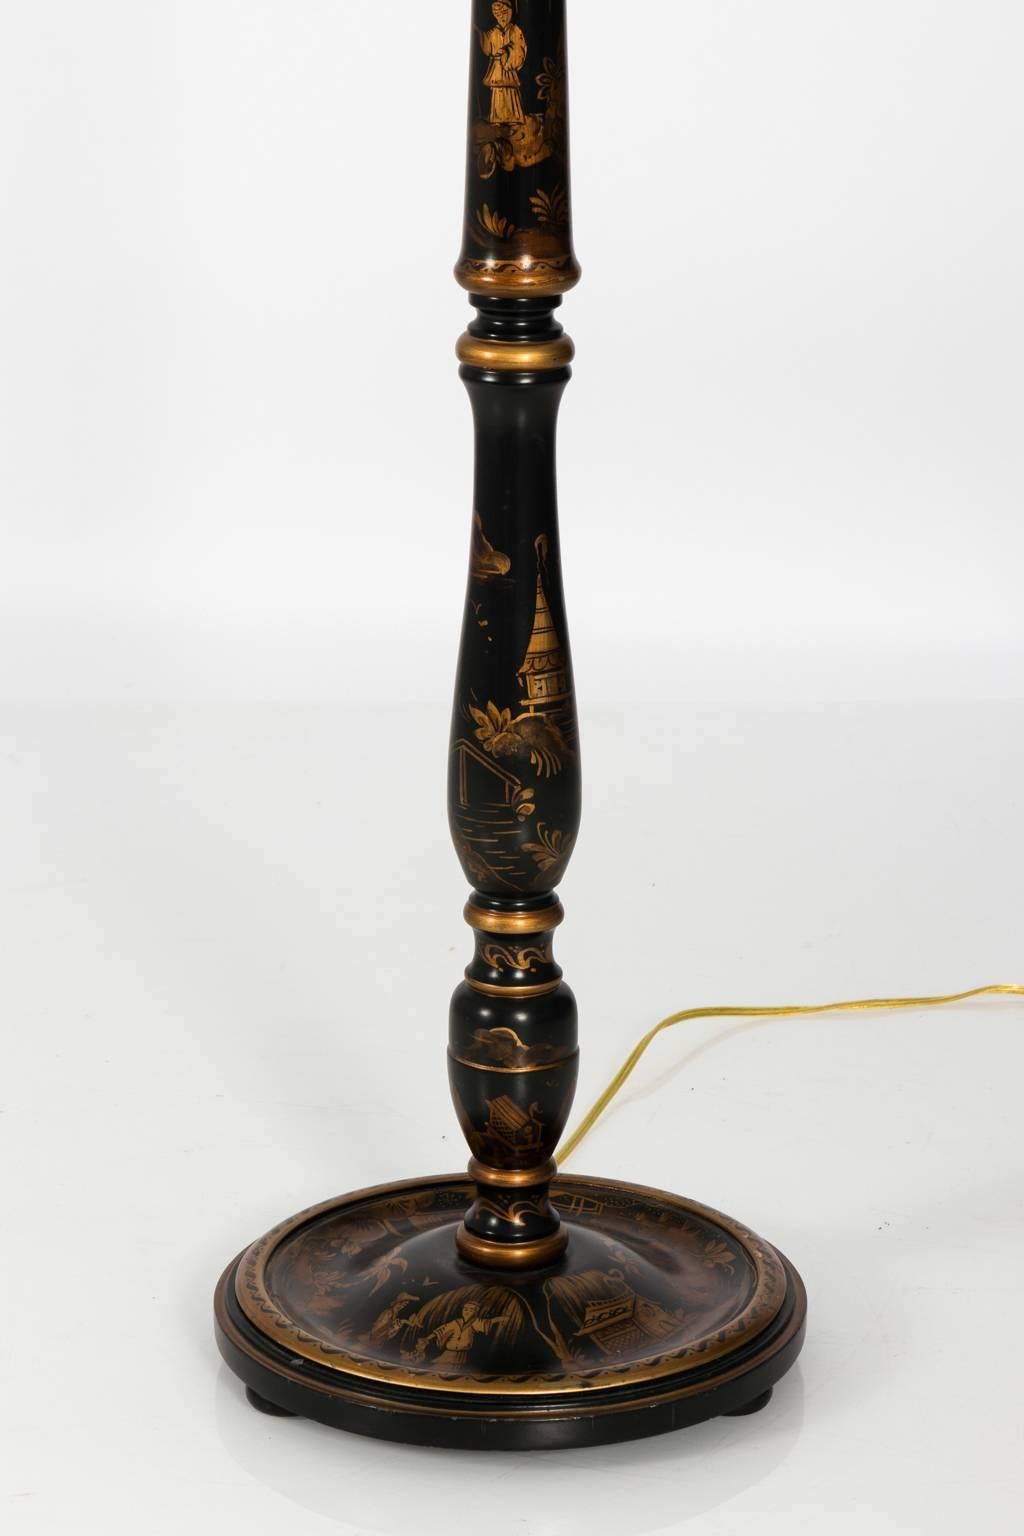 Chinoiserie style floor lamp with gold painted decorative figures, circa 20th century. Shade not included.
 